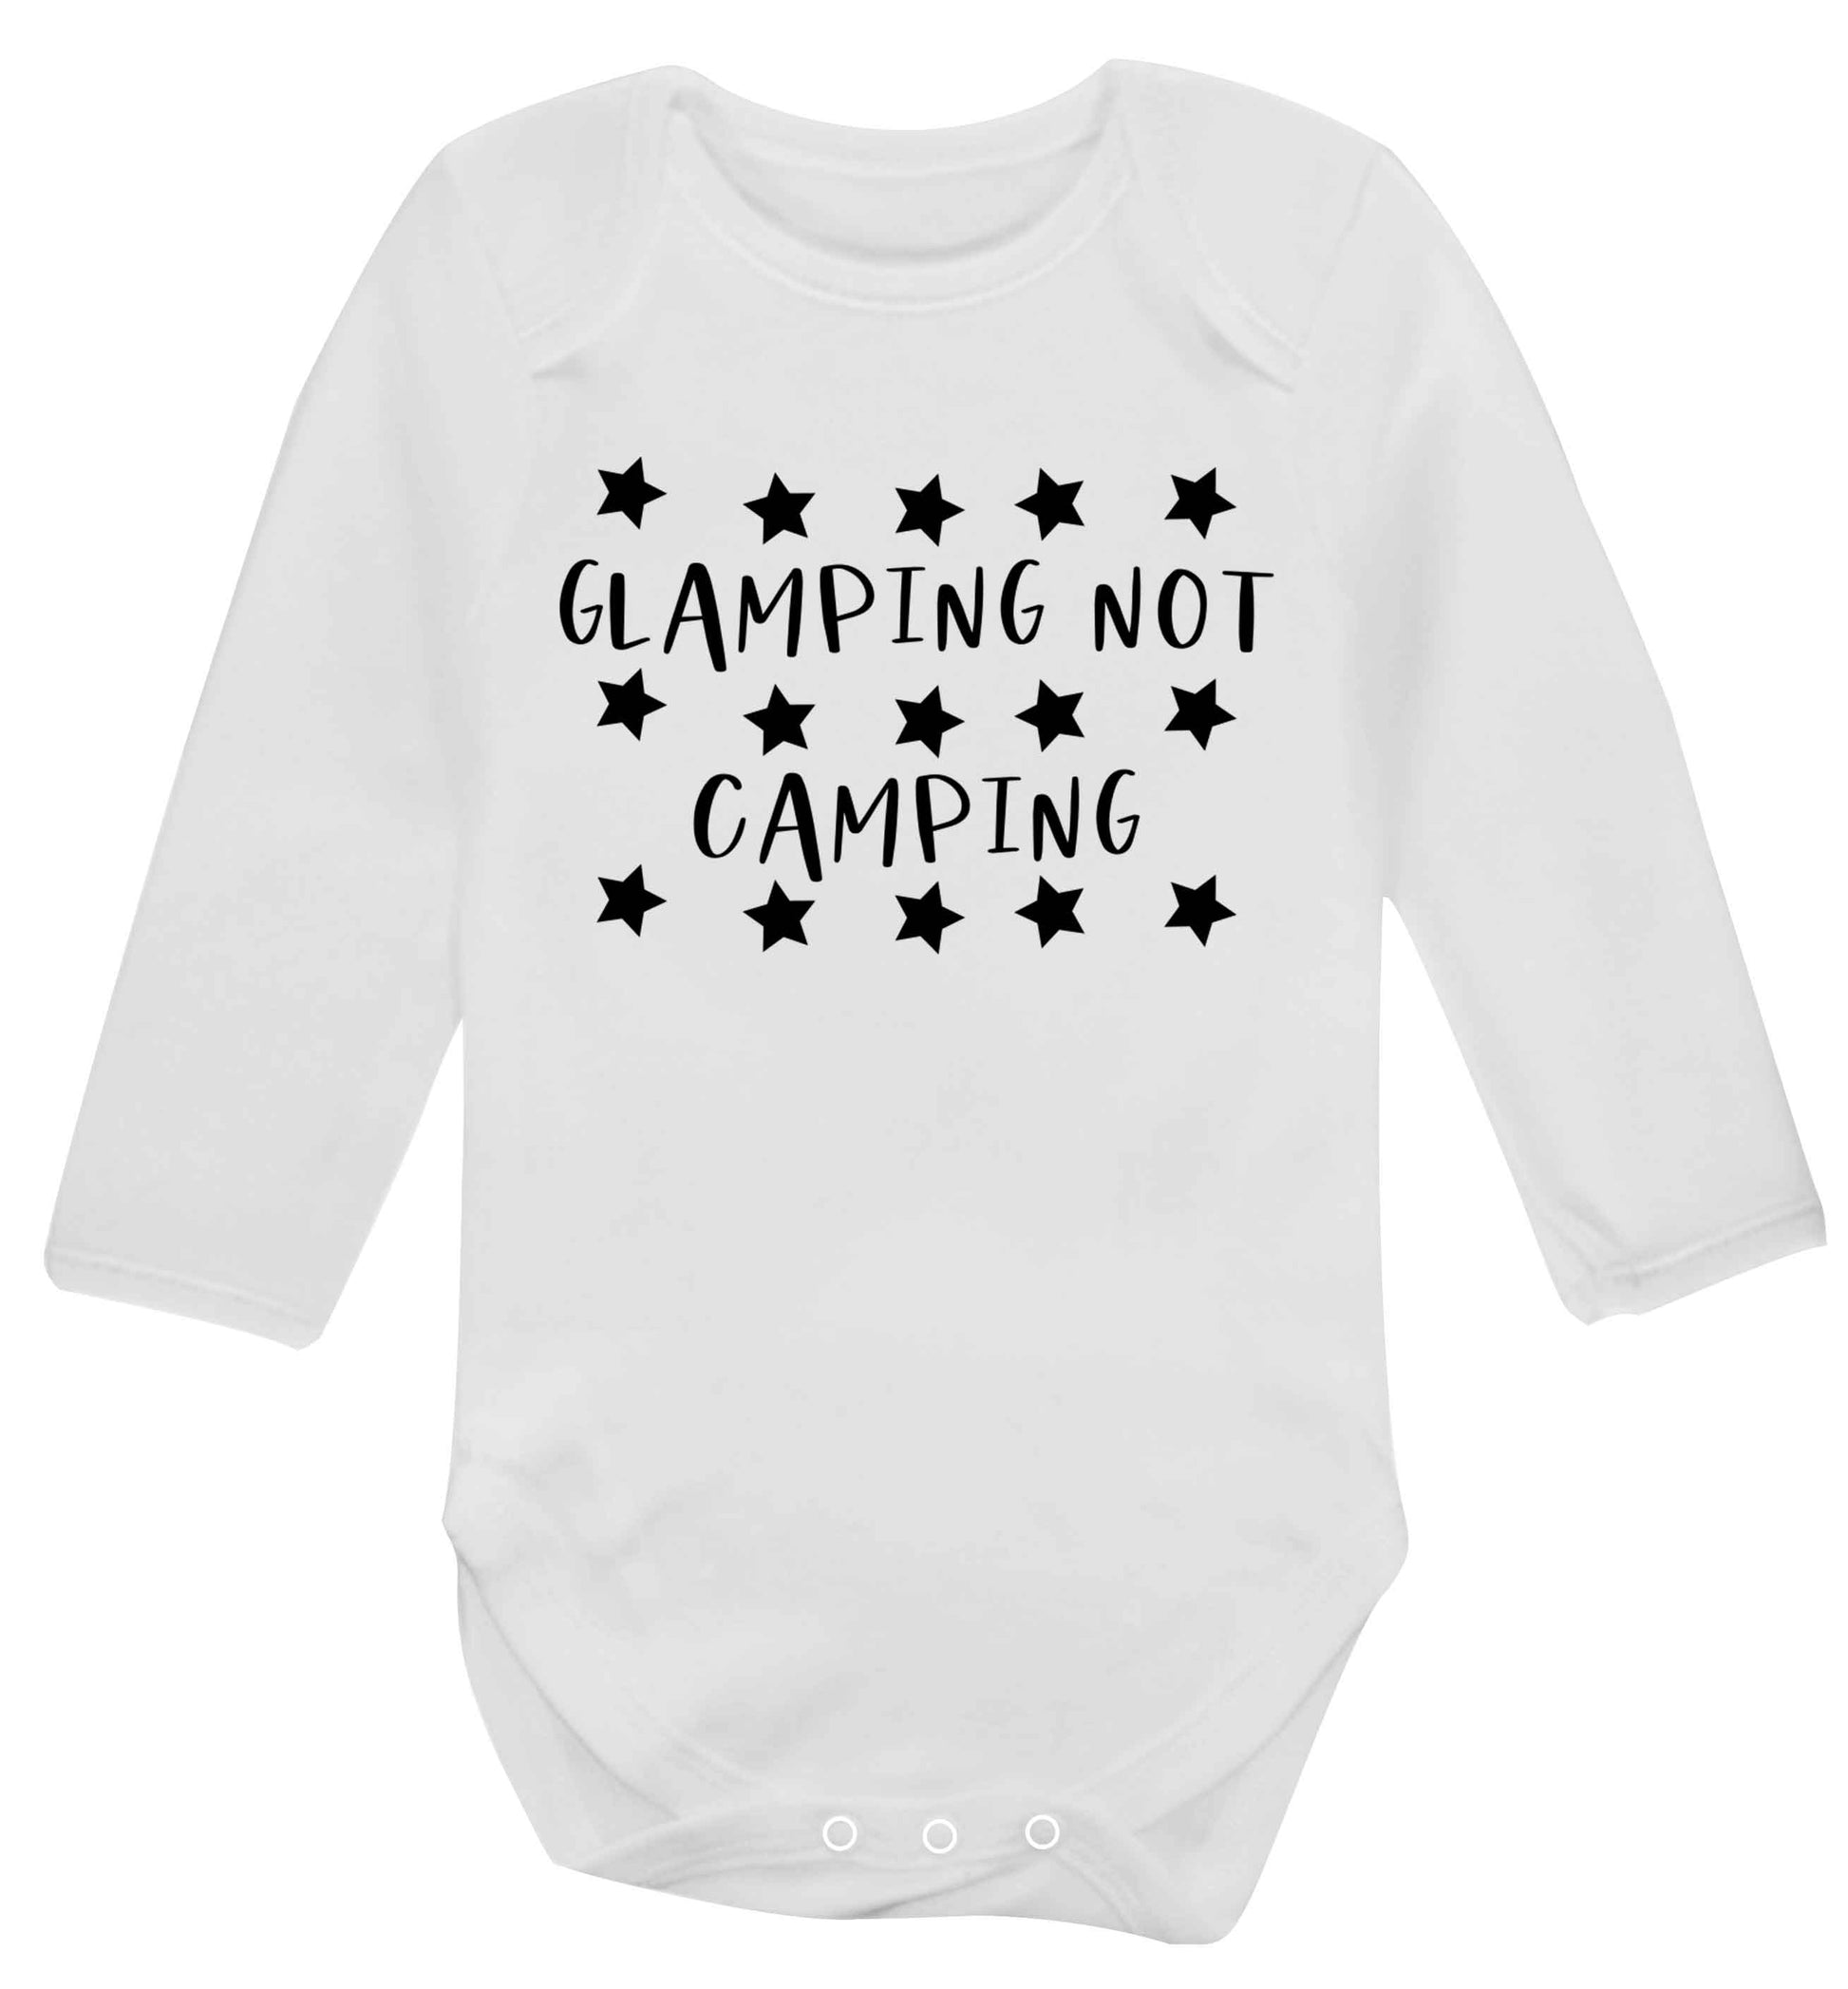 Glamping not camping Baby Vest long sleeved white 6-12 months